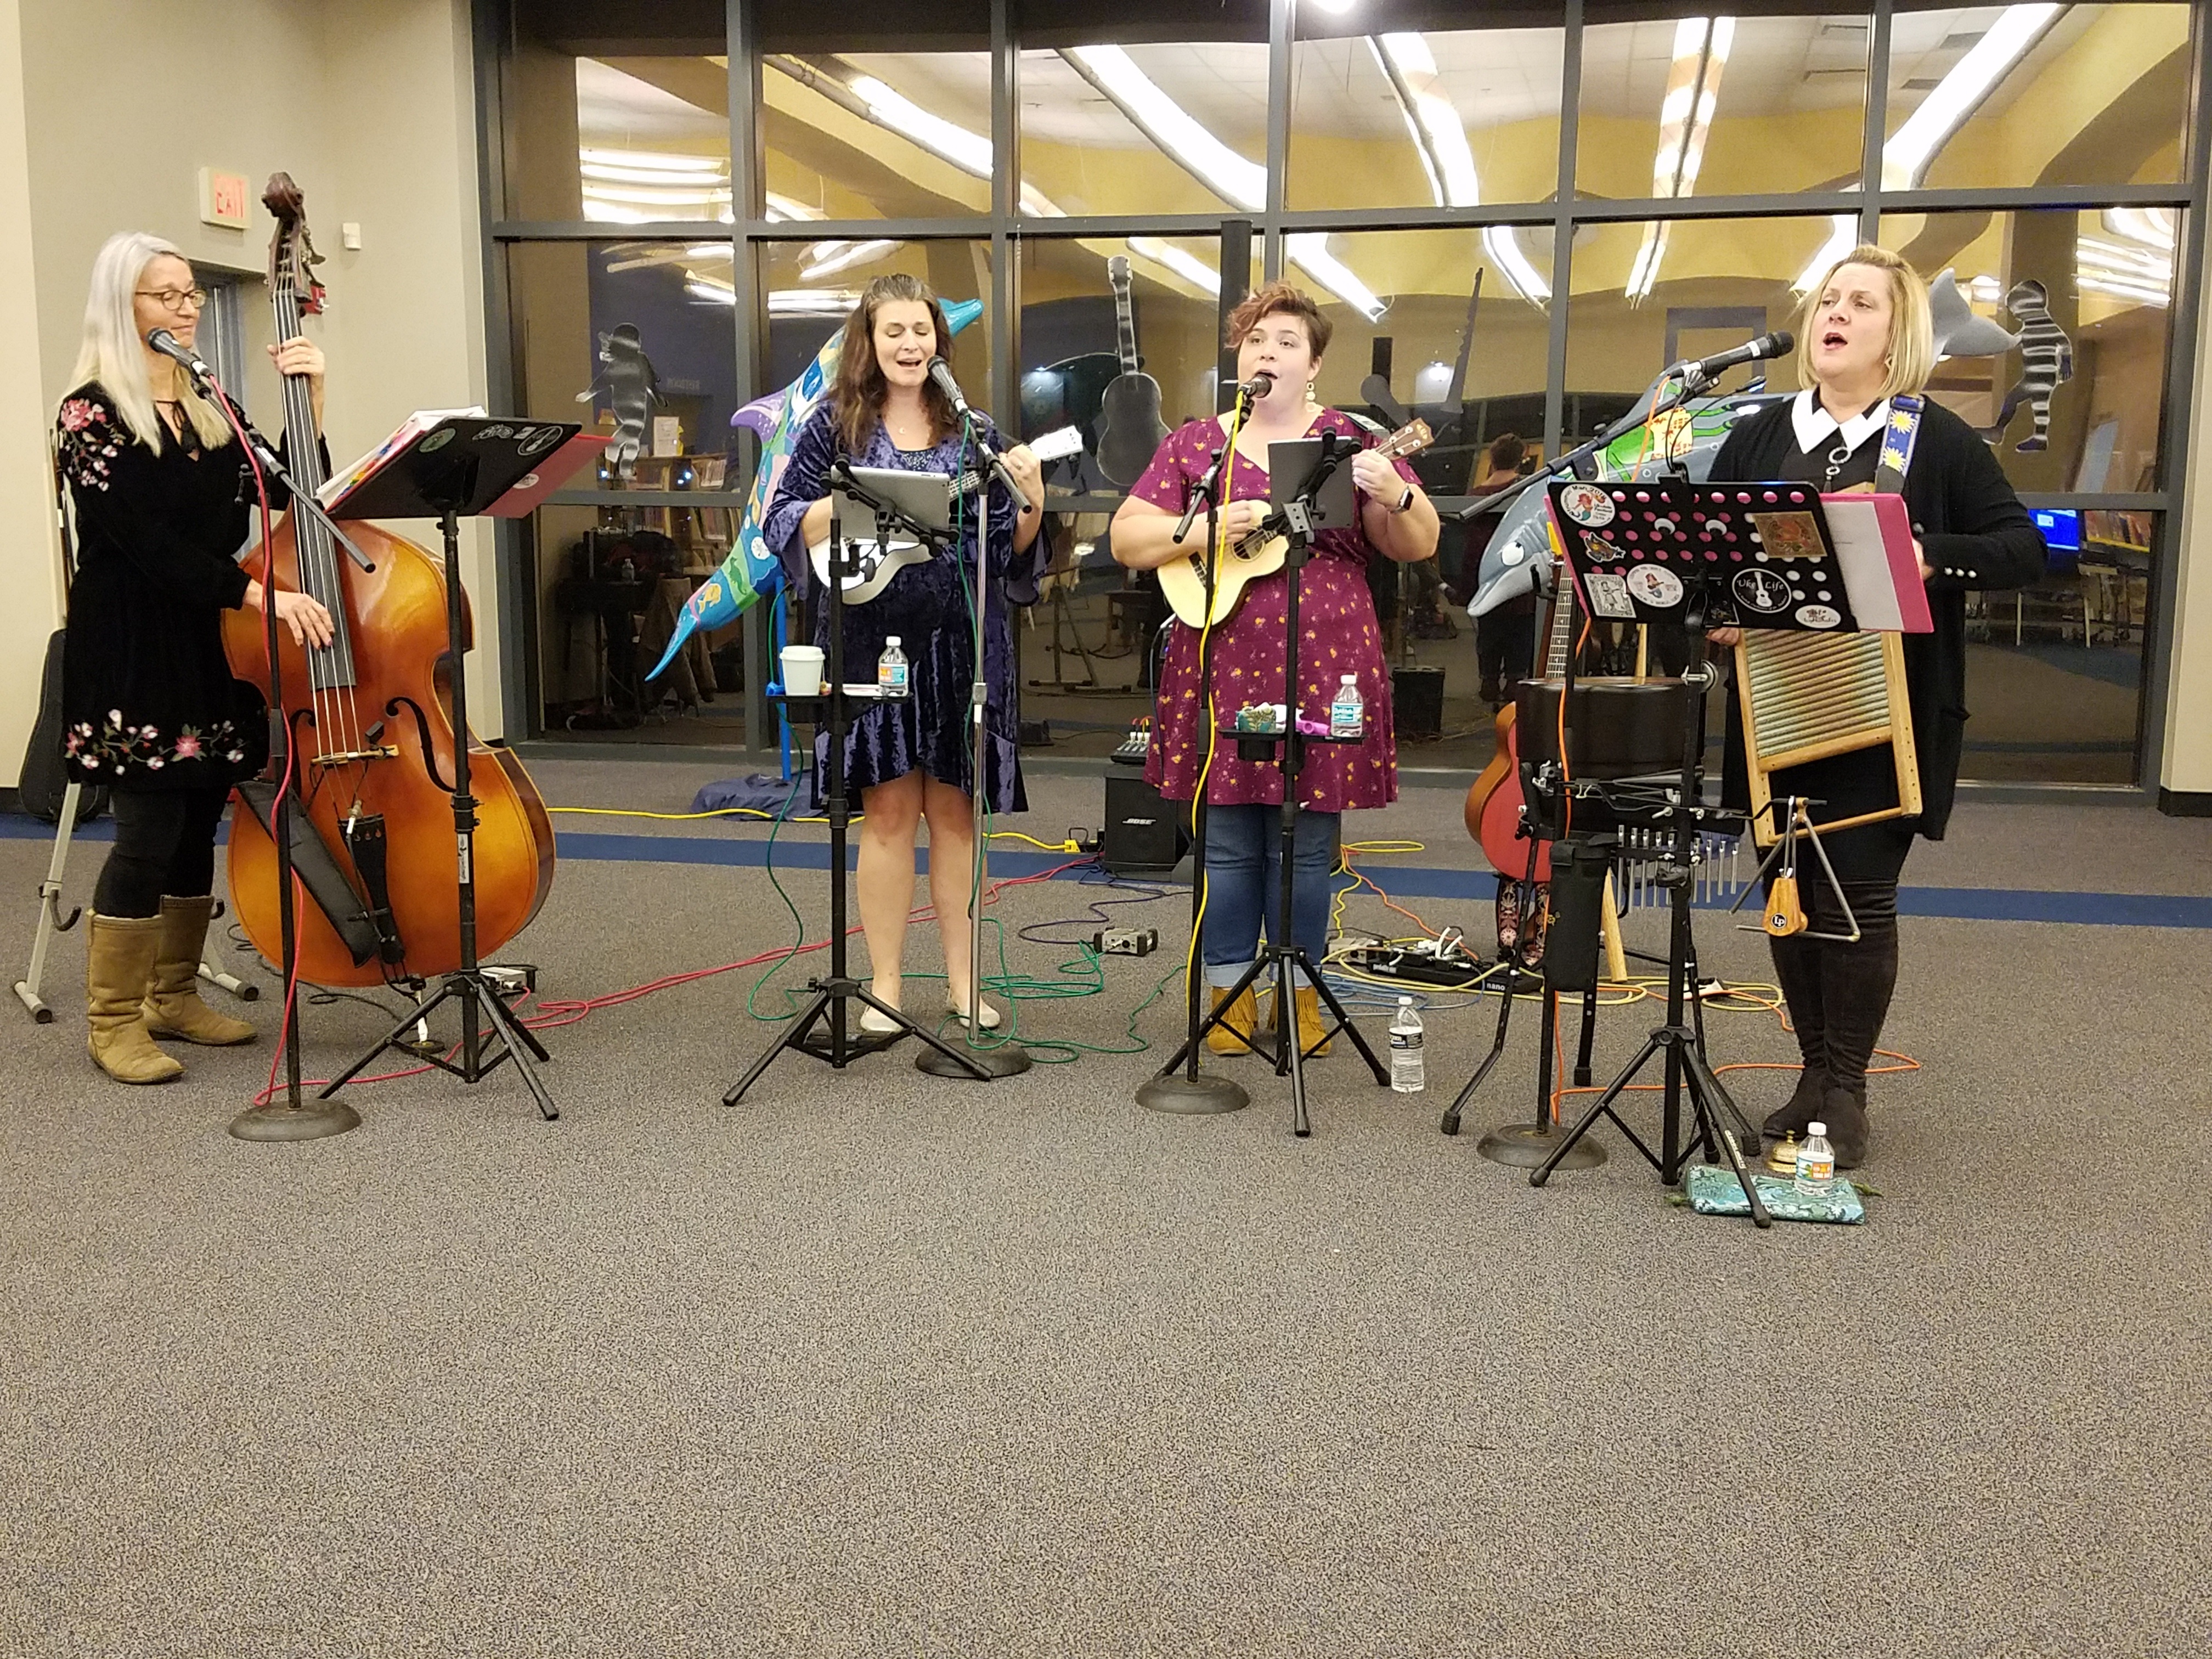 Photograph of musical group Wabi Sabis playing at the library